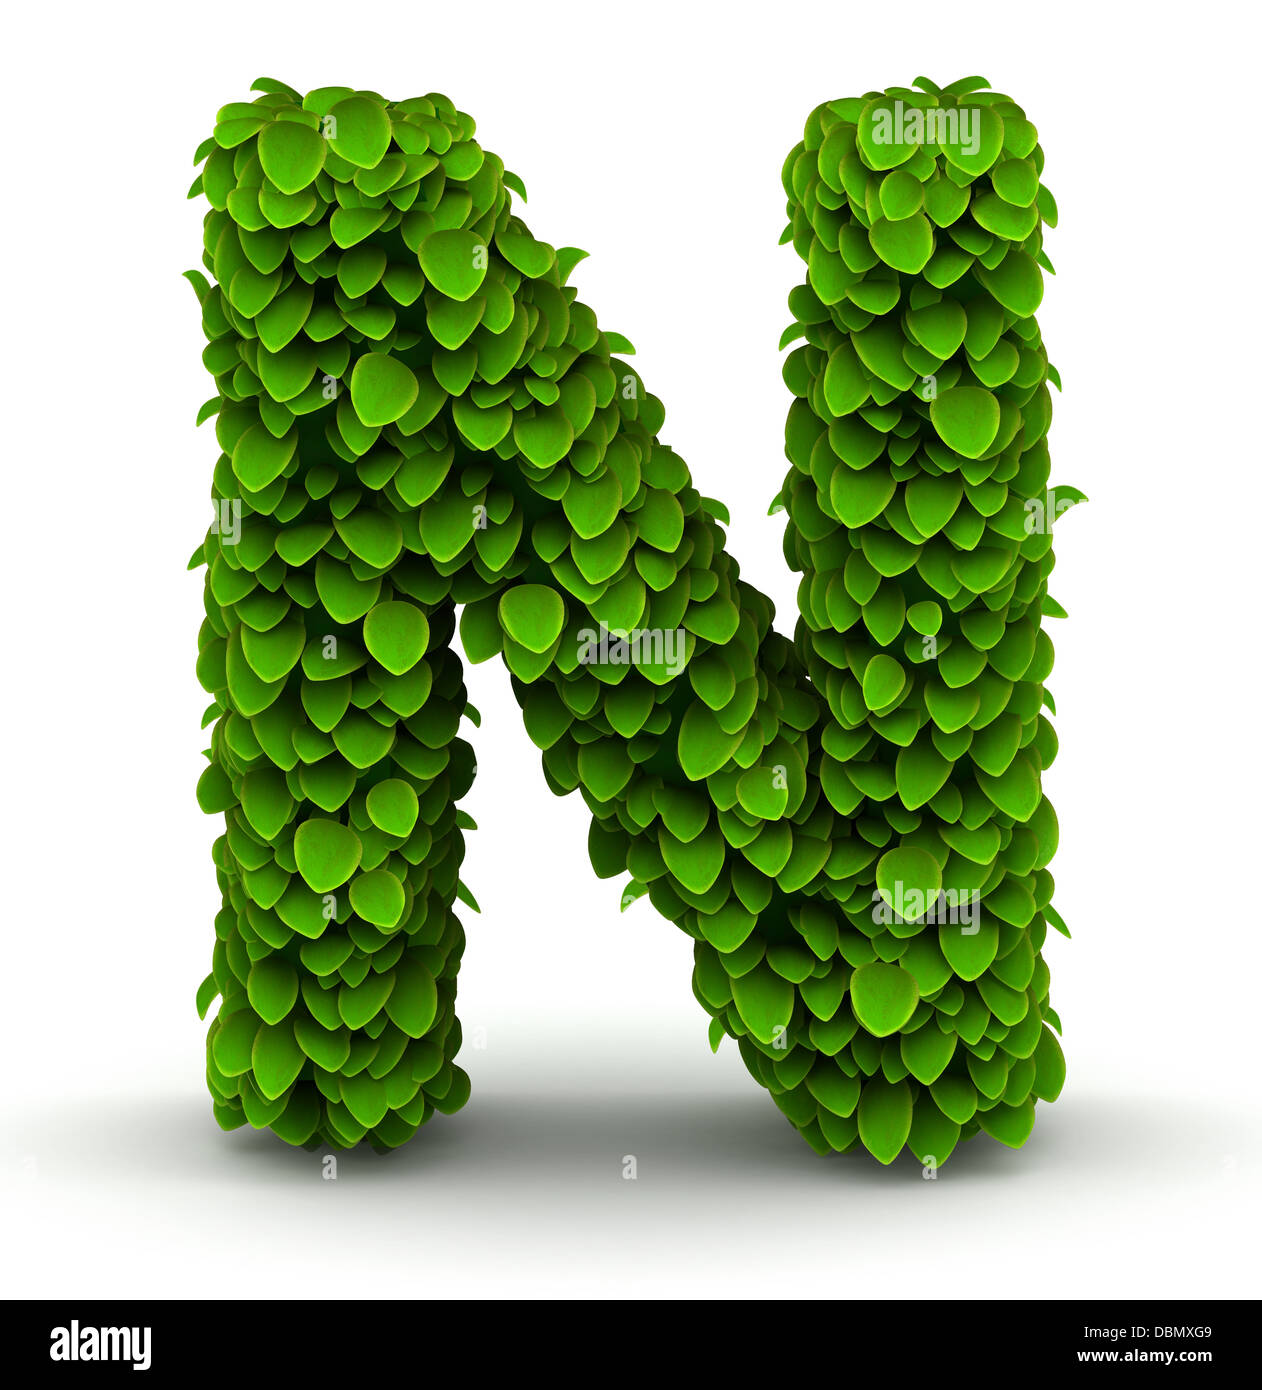 Letter N made from natural elements - Impossible Images - Unique stock  images for commercial use.